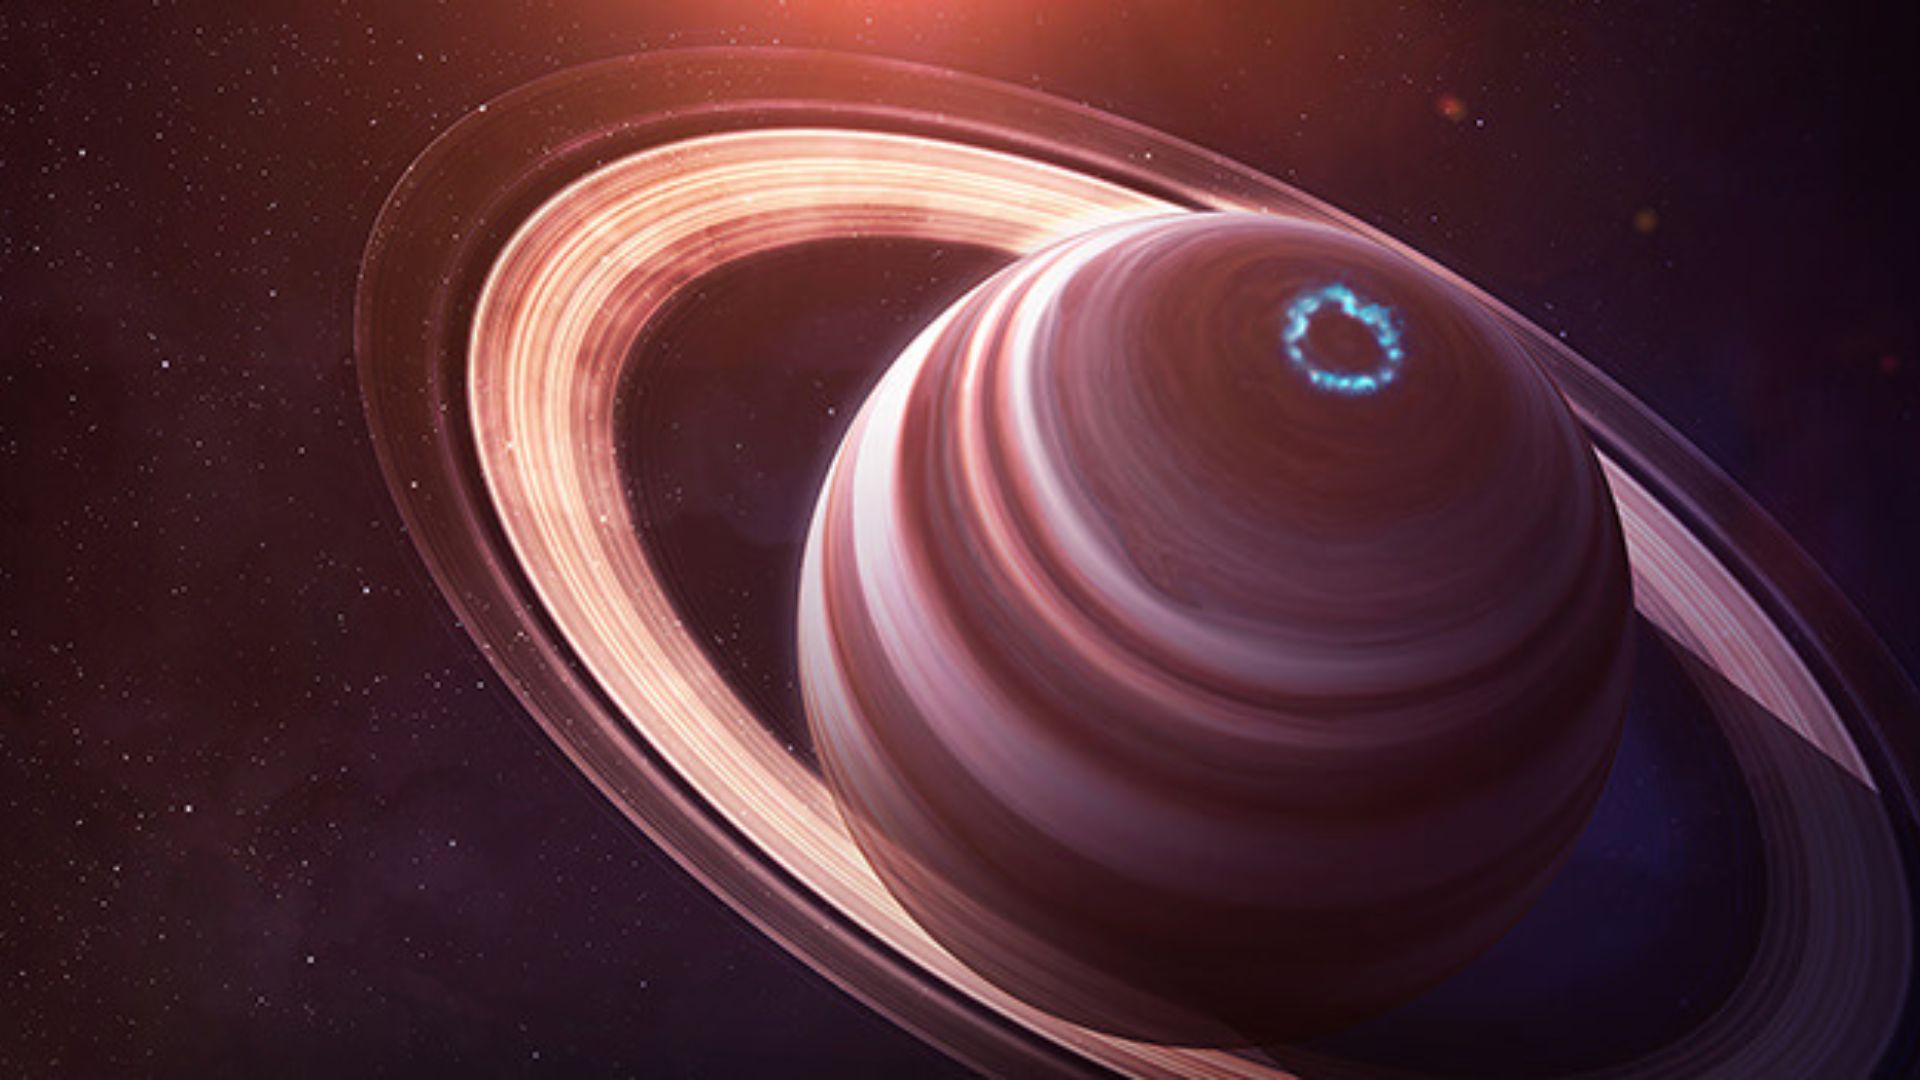 Saturn Planet with a circle blue path in its northern hemisphere